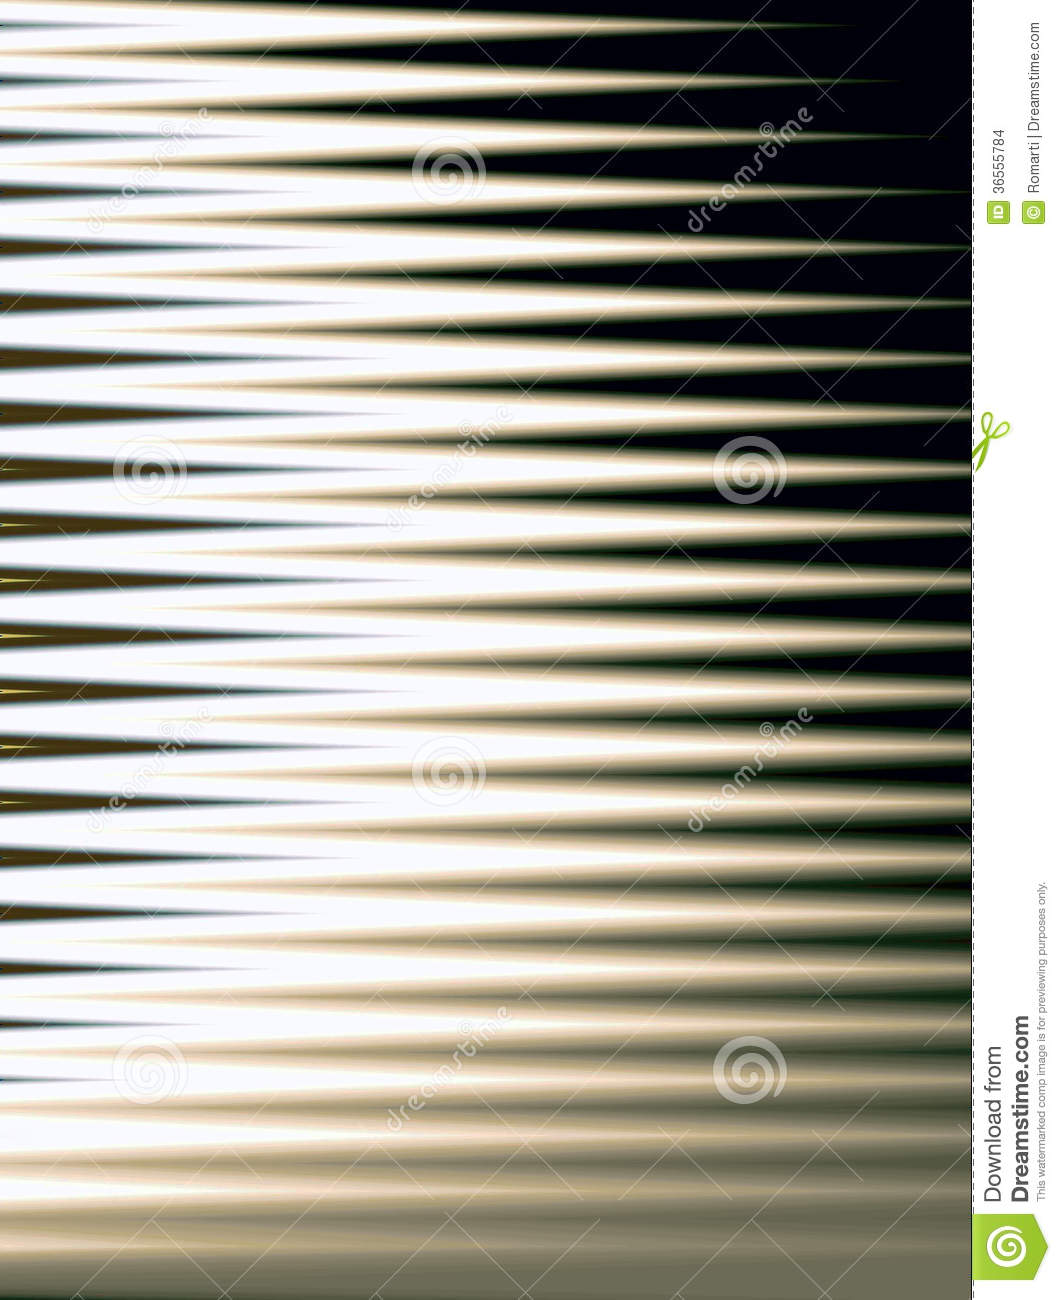 Abstract That Resembles Sunlight Passing Through Window Blinds